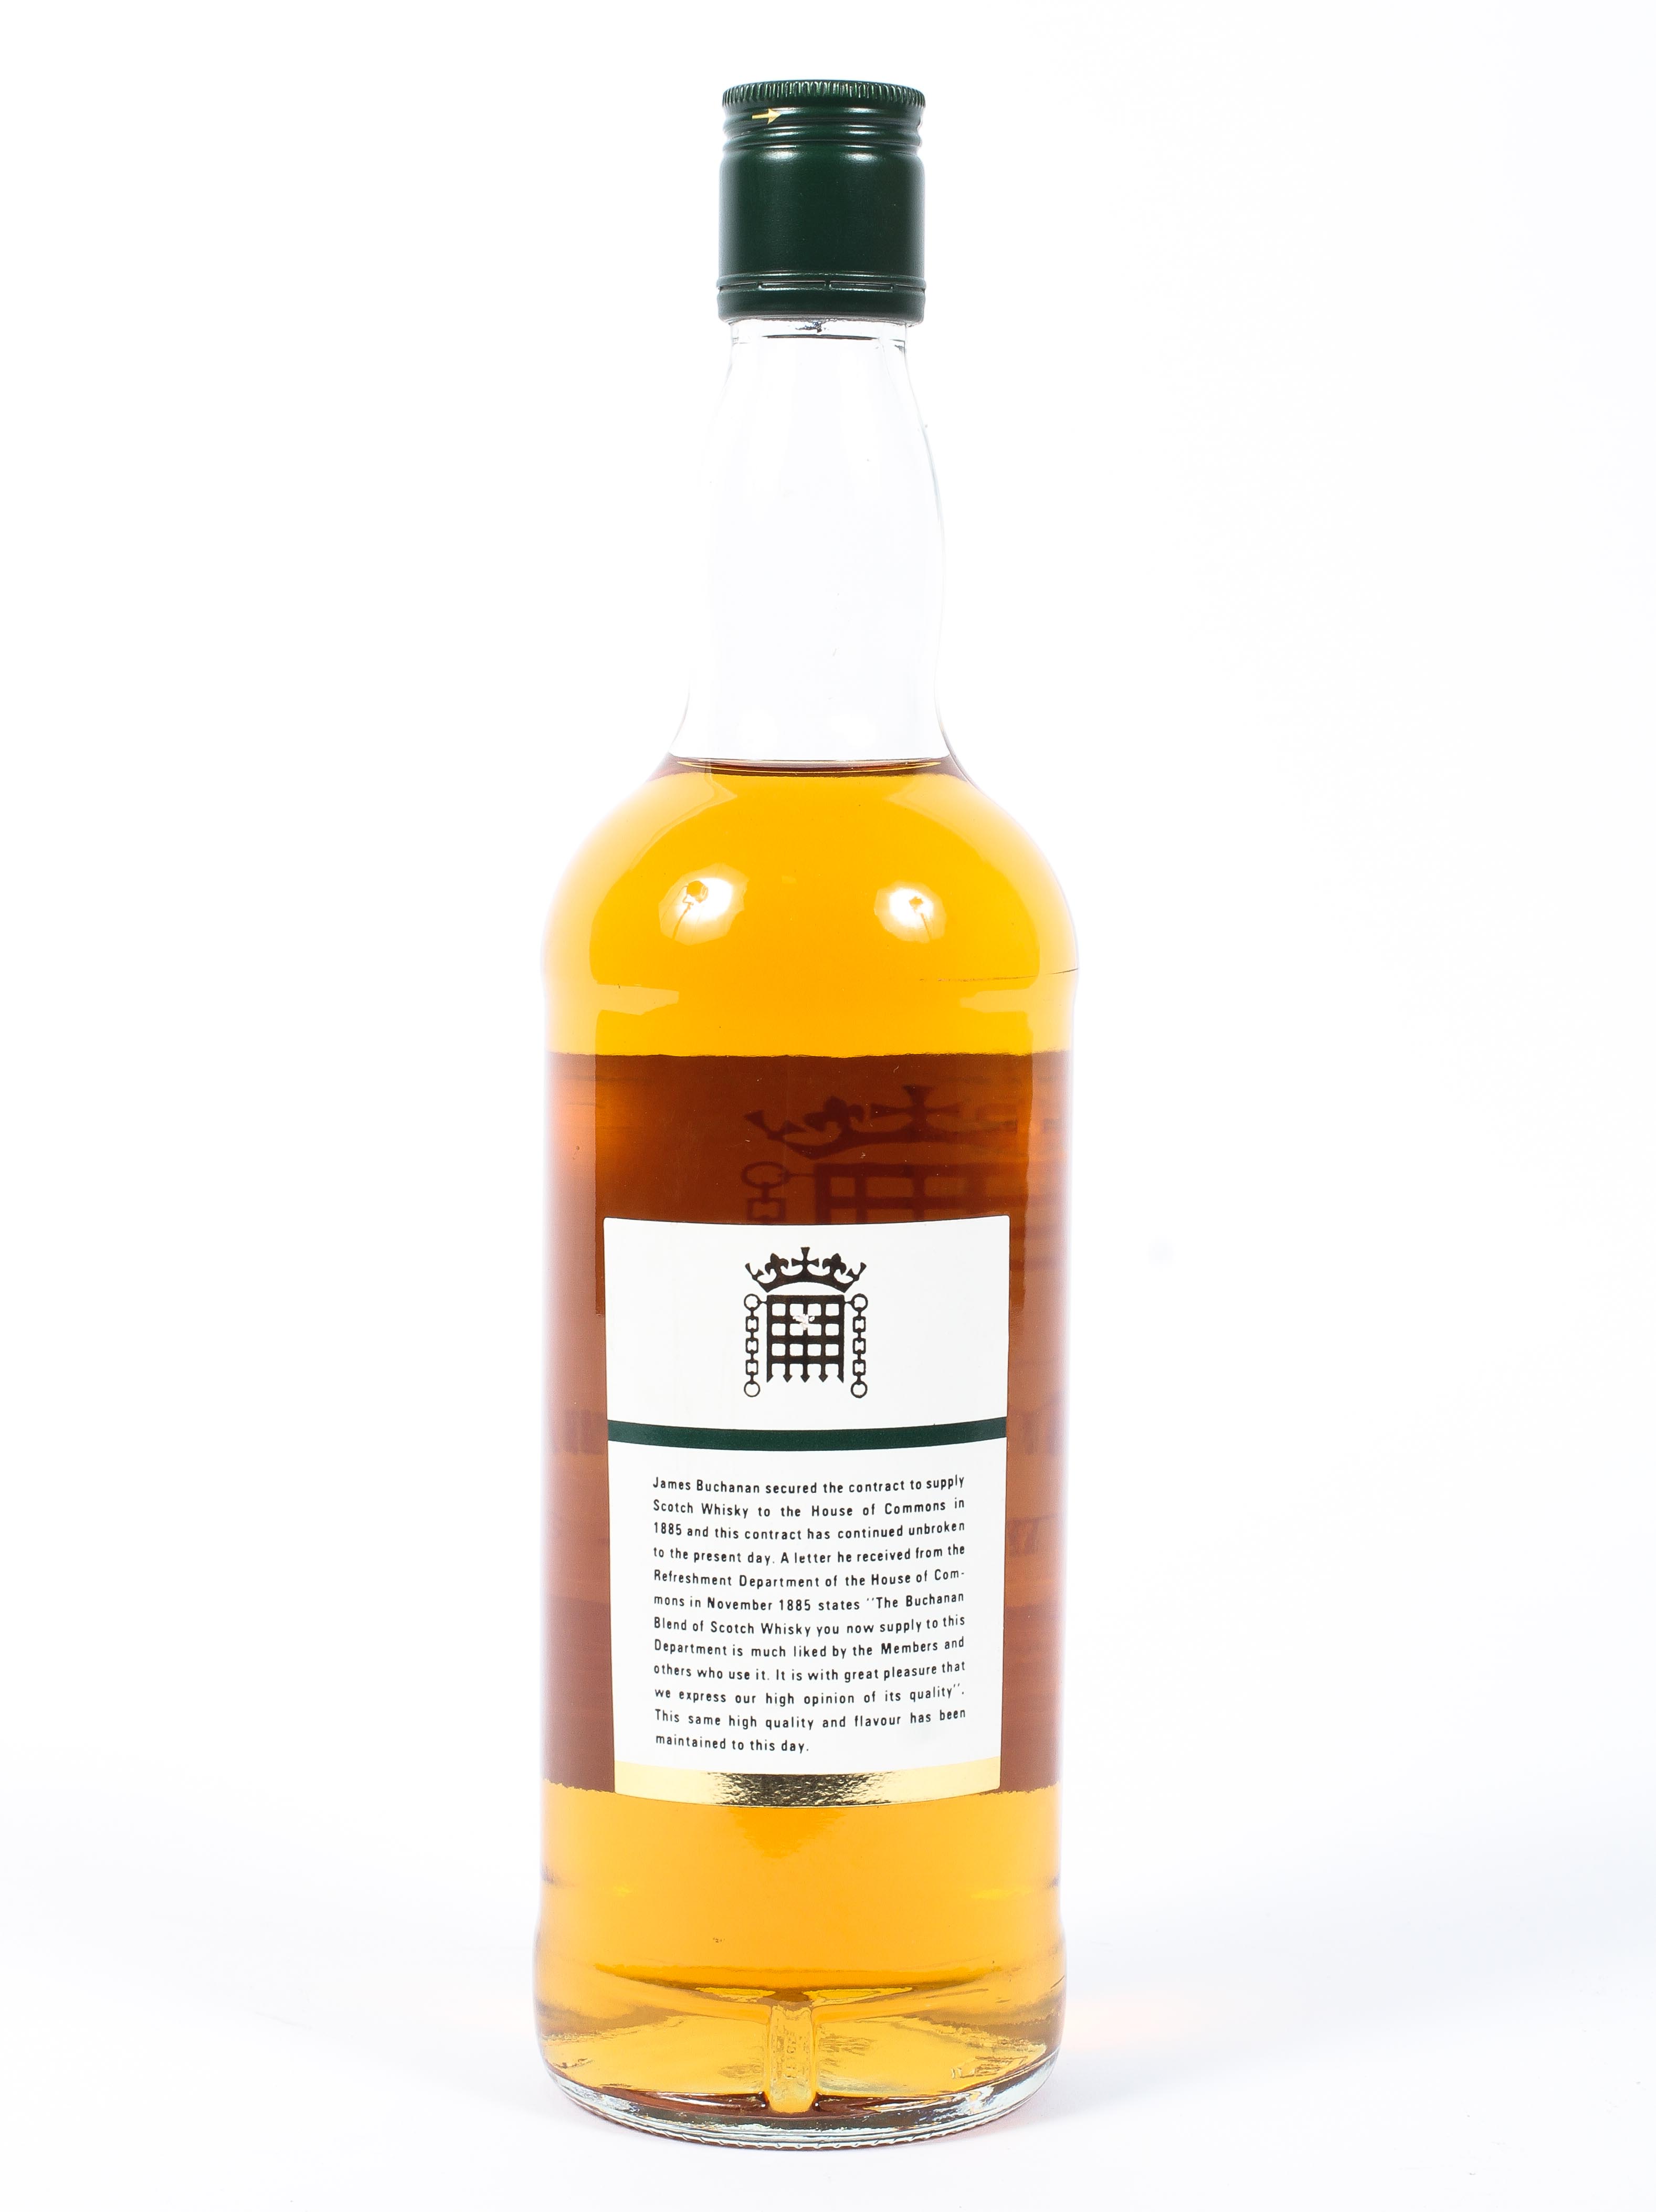 A bottle of House of Commons No.1 Scotch whisky by James Buchanan Company, Glasgow. - Image 2 of 2